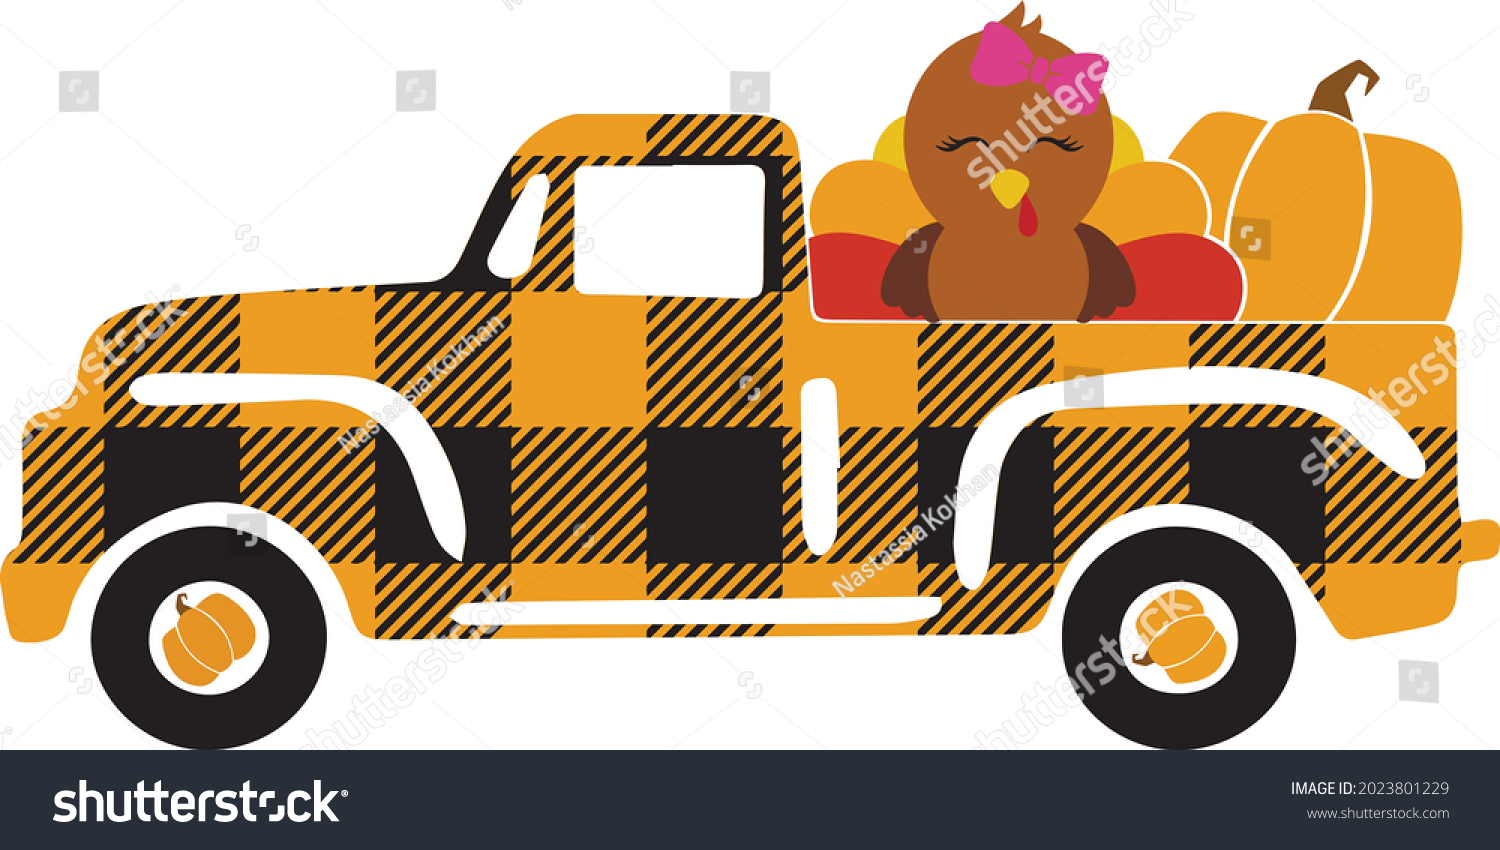 SVG of Happy thanksgiving truck with turkey svg vector Illustration isolated on white background. Happy thanksgiving shirt. Green fall truck. Autumn truck sublimation. Buffalo plaid fall truck svg